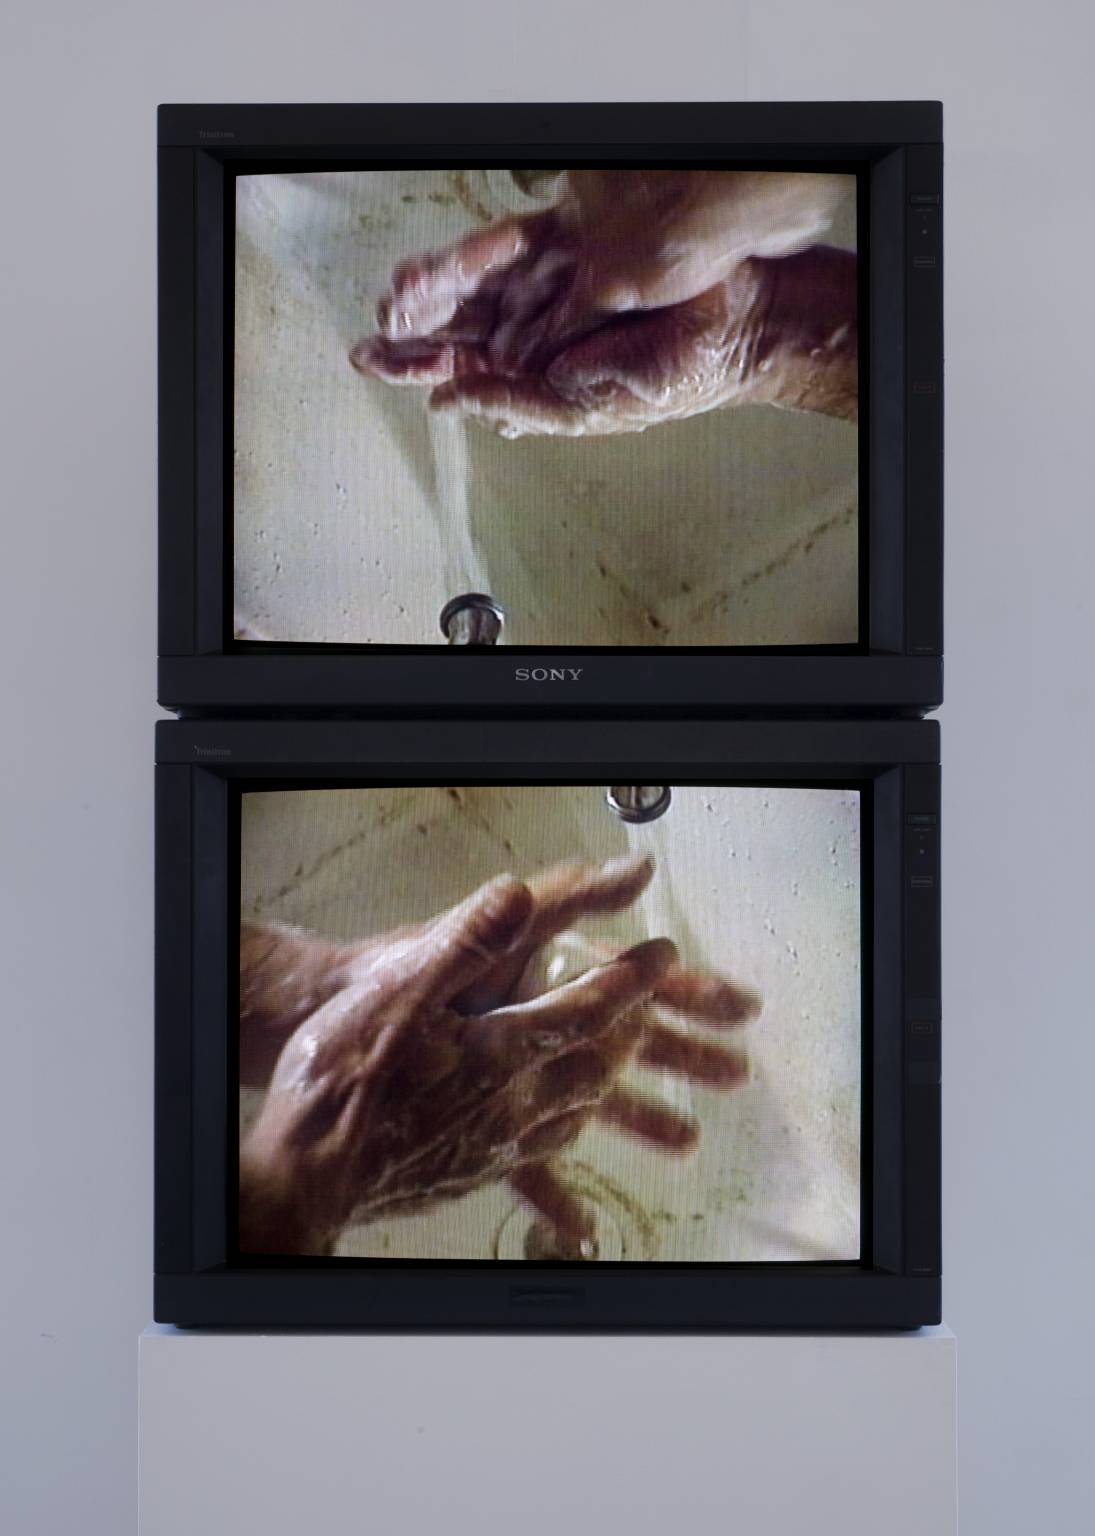 Raw Material Washing Hands, Normal (A of A/B) Raw Material Washing Hands, Normal (B of A/B) (1996)  Bruce Nauman